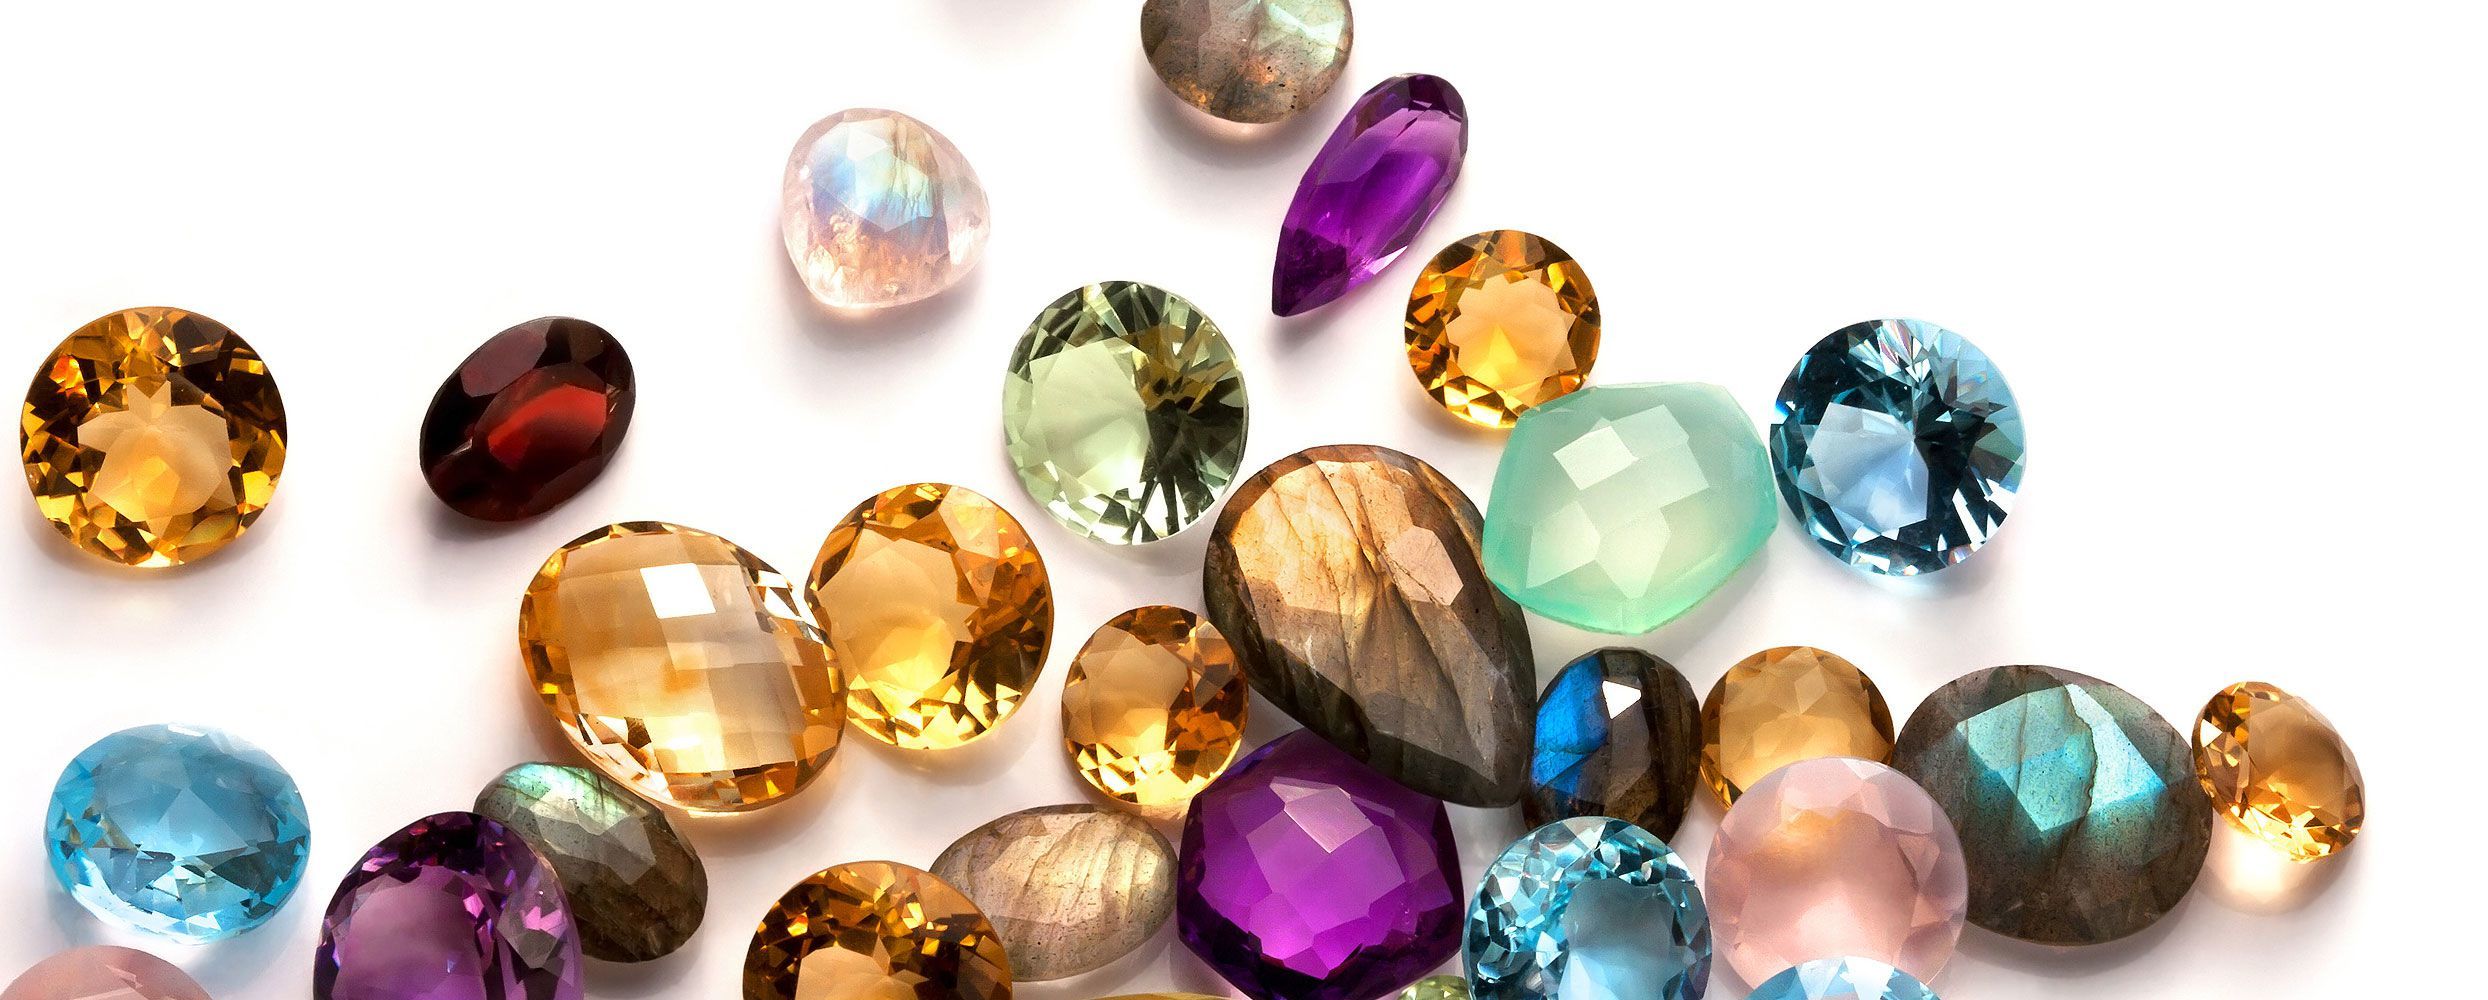 China's Booming Gemstones Market | Luxify - Lux Column